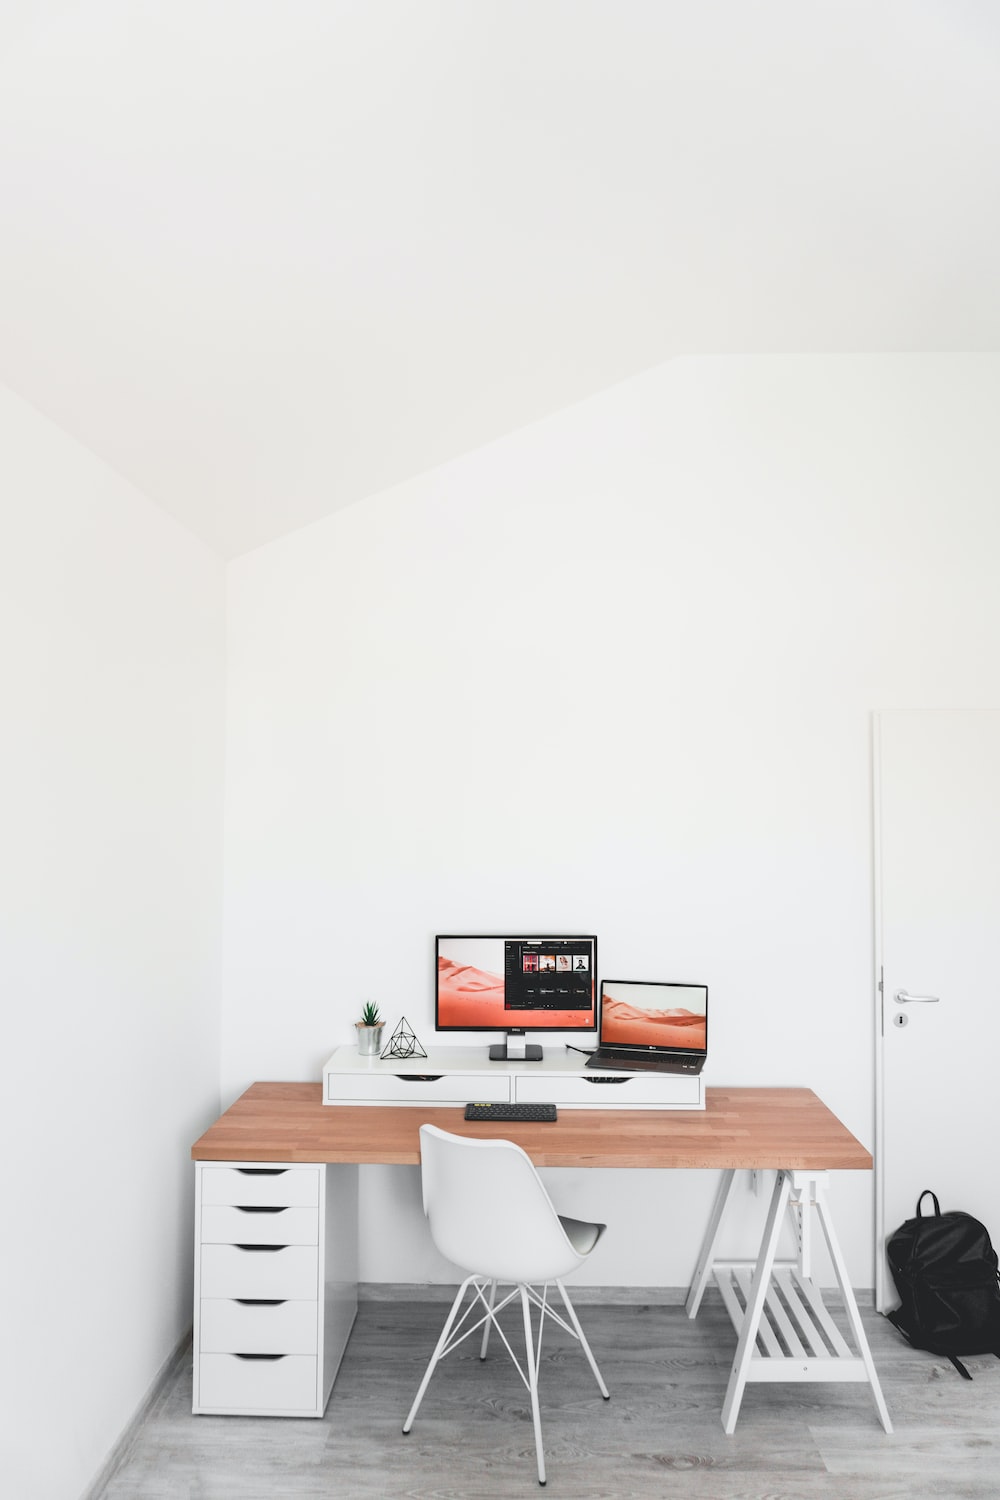 What is the importance of desk in office?